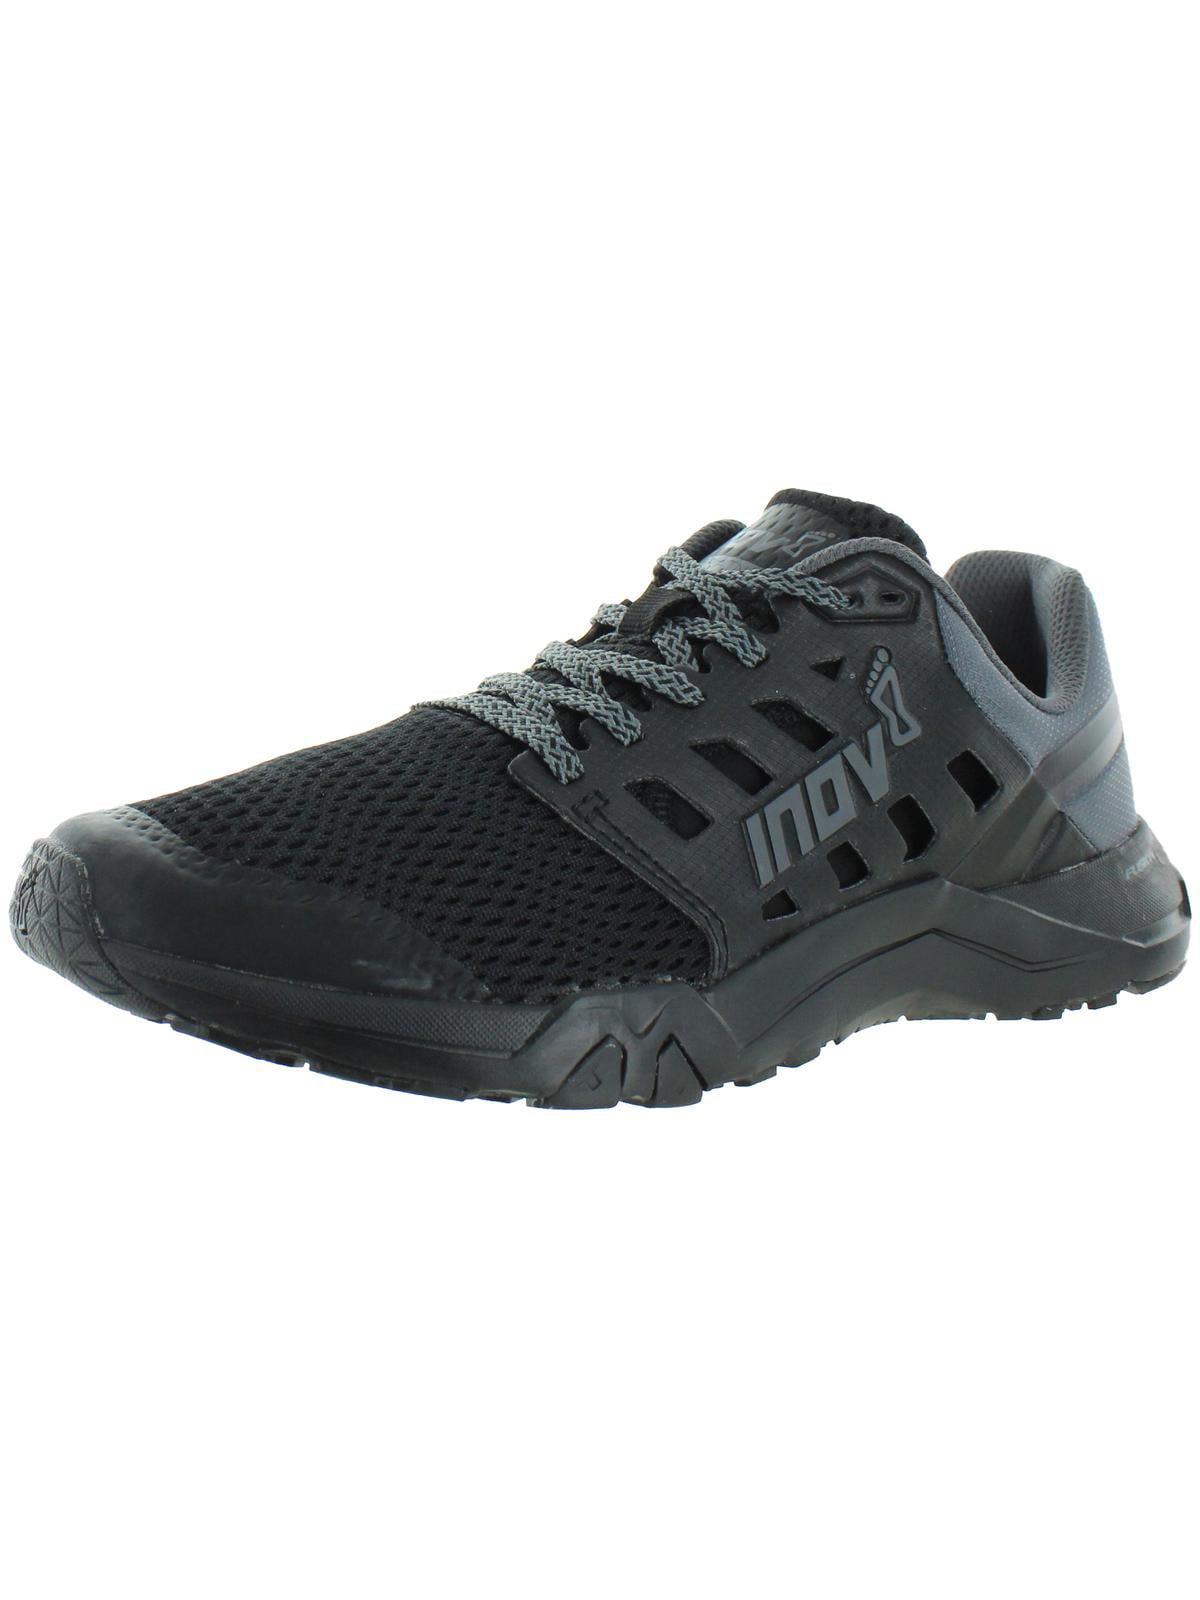 Details about   Inov-8 Women's All Train 215 Cross-Trainer Shoe 